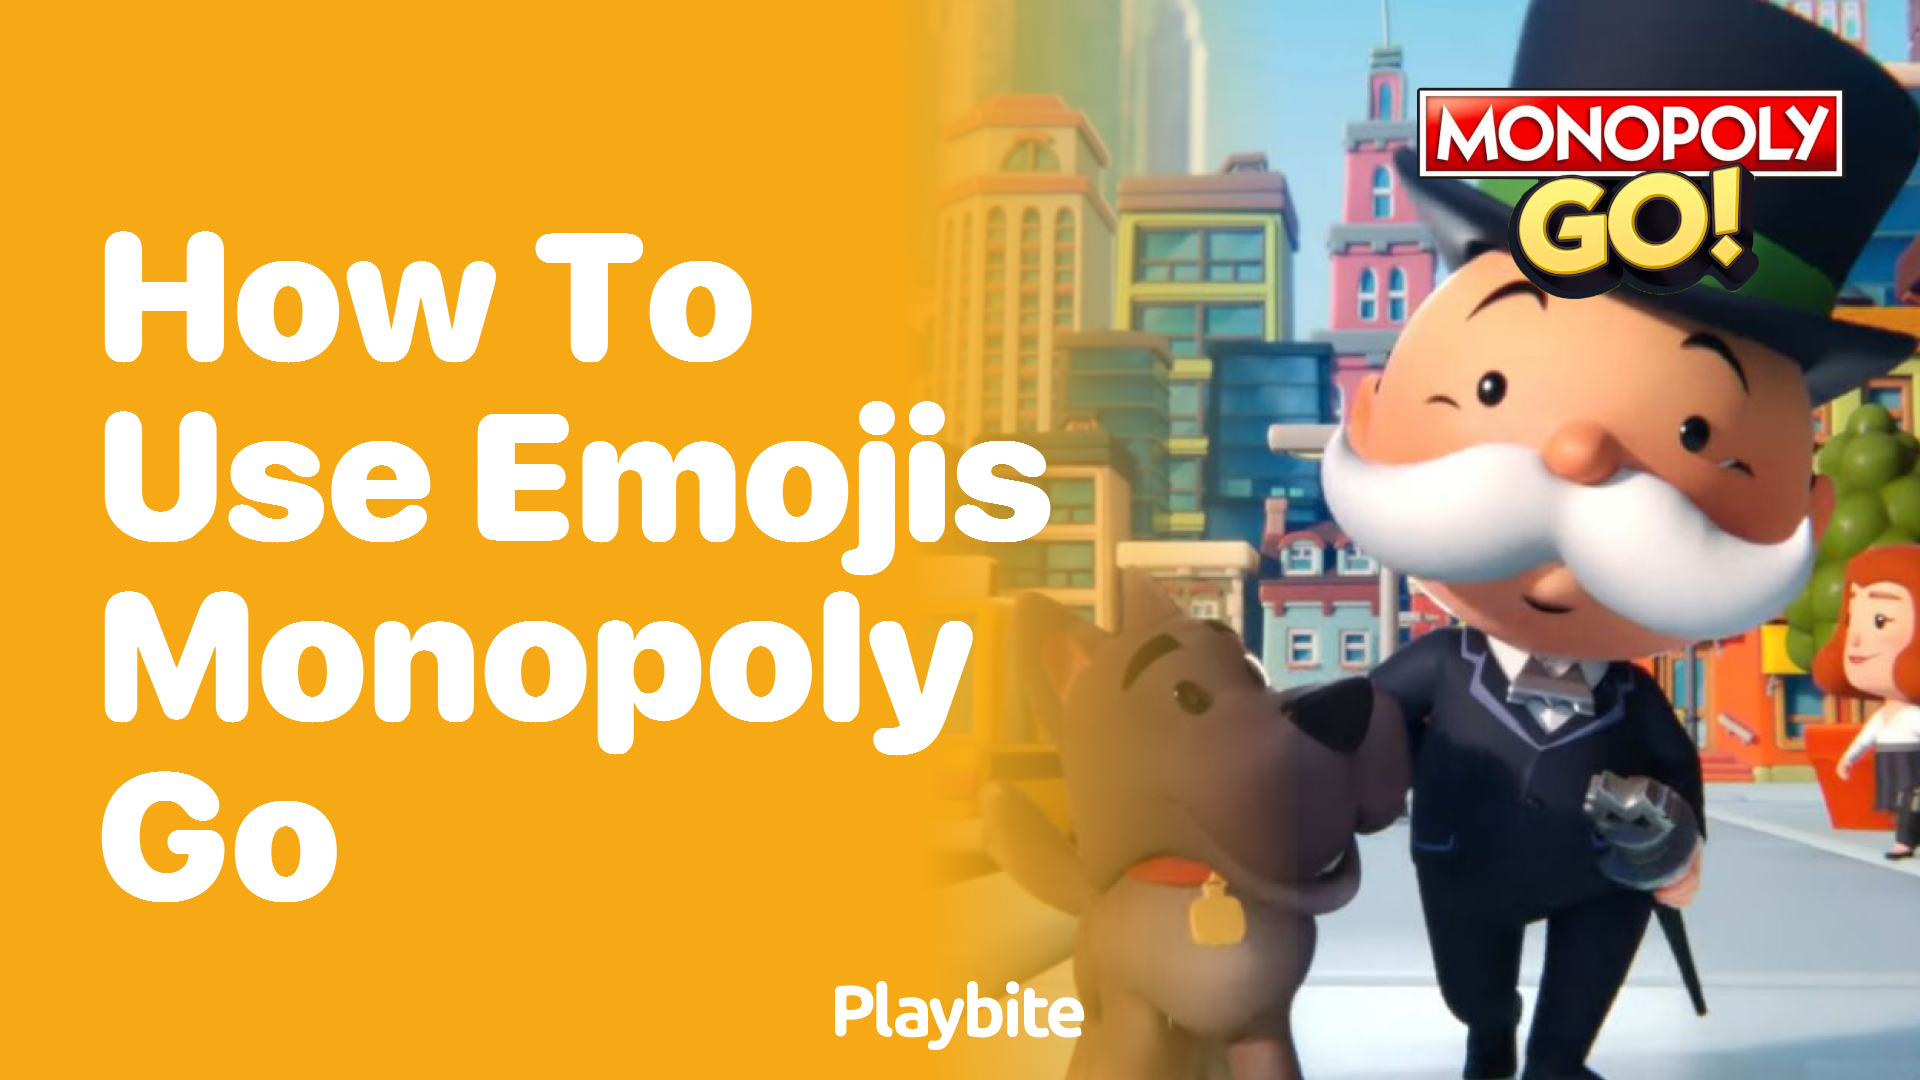 How to Use Emojis in Monopoly Go